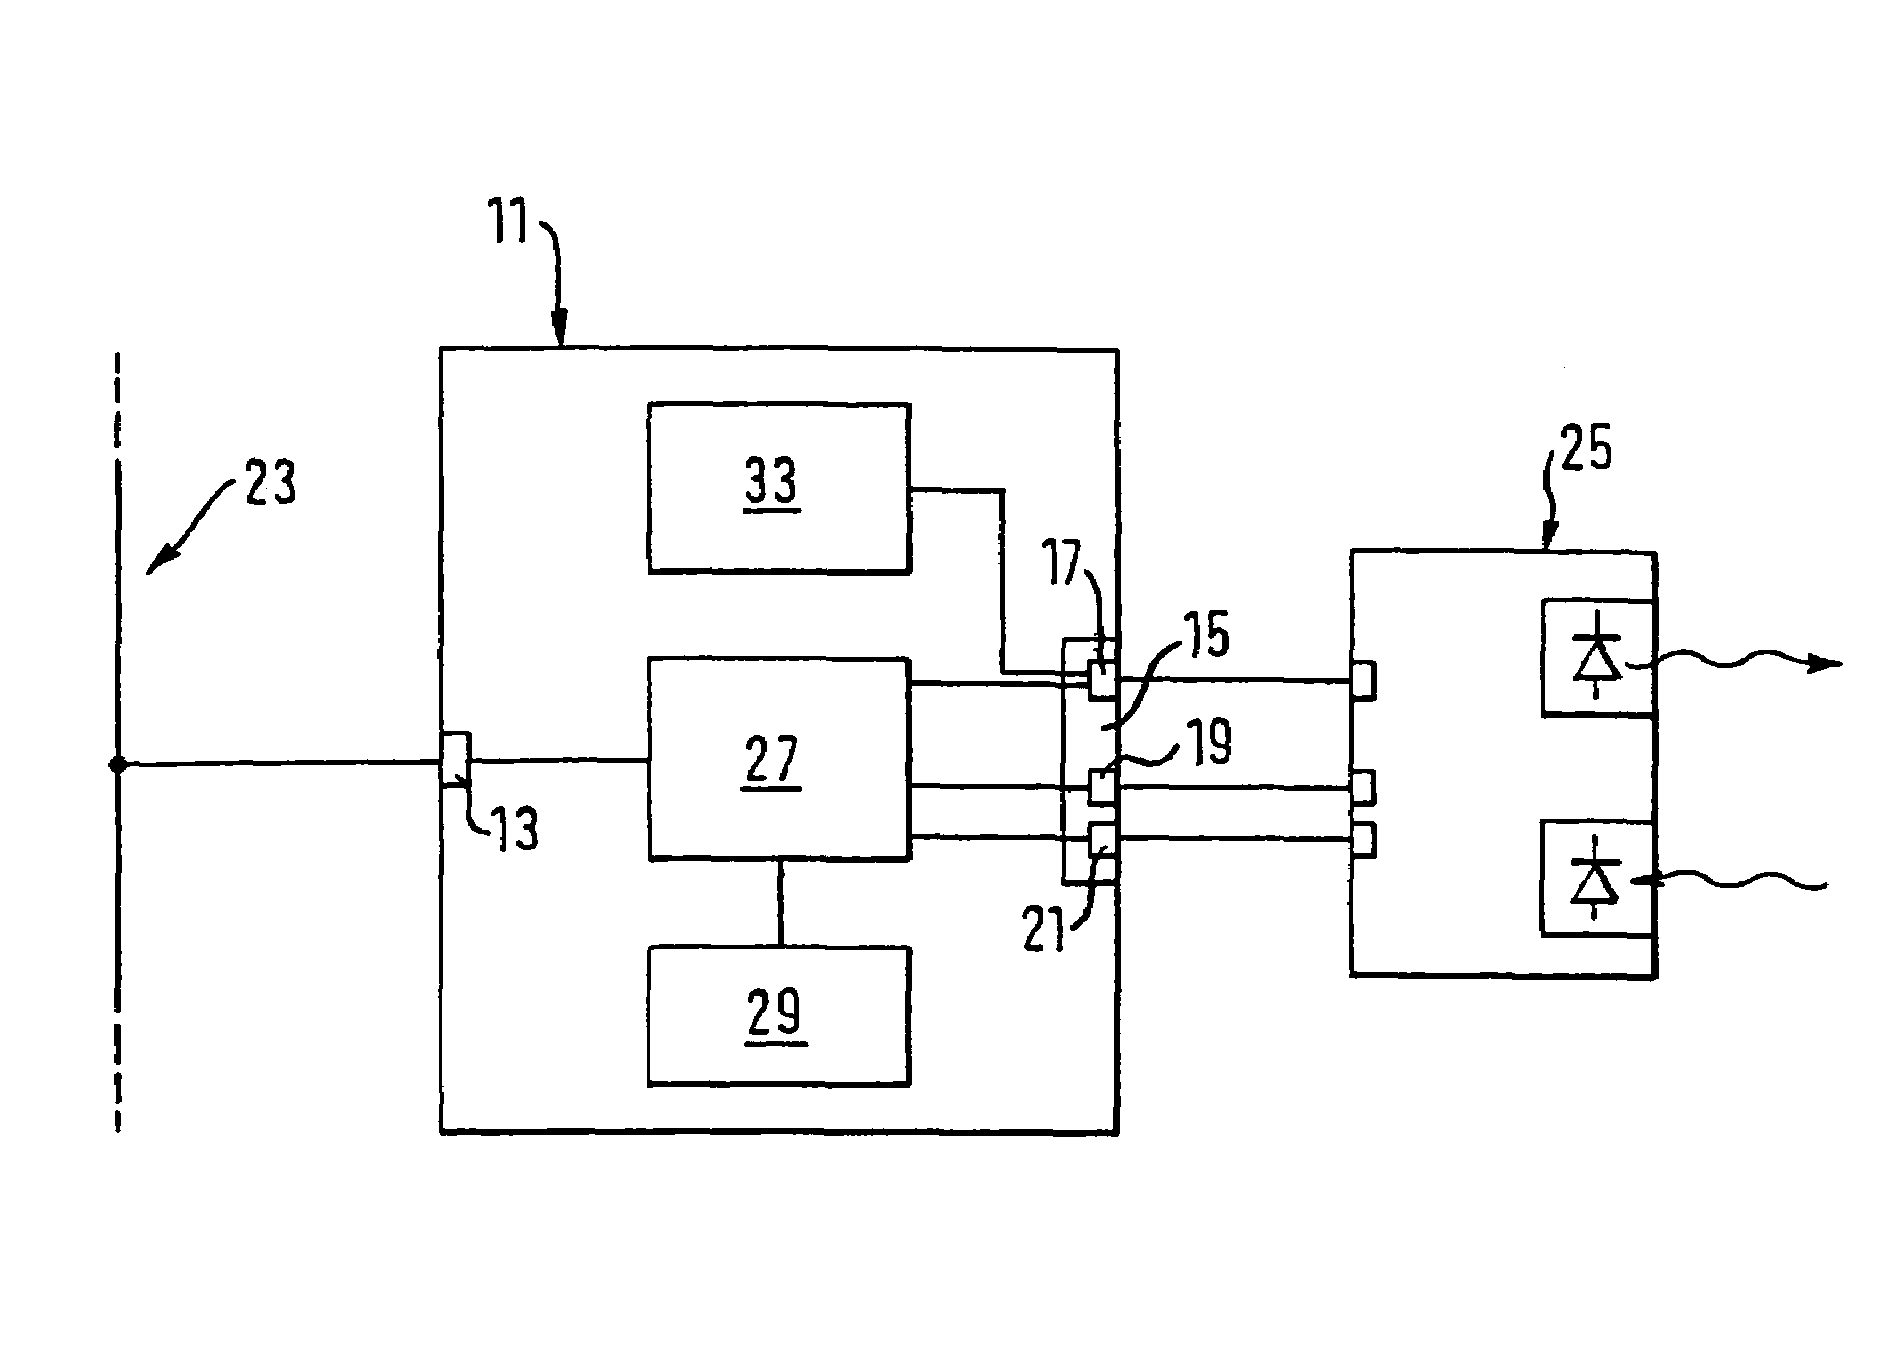 Connection module for the connection of a sensor to a fieldbus